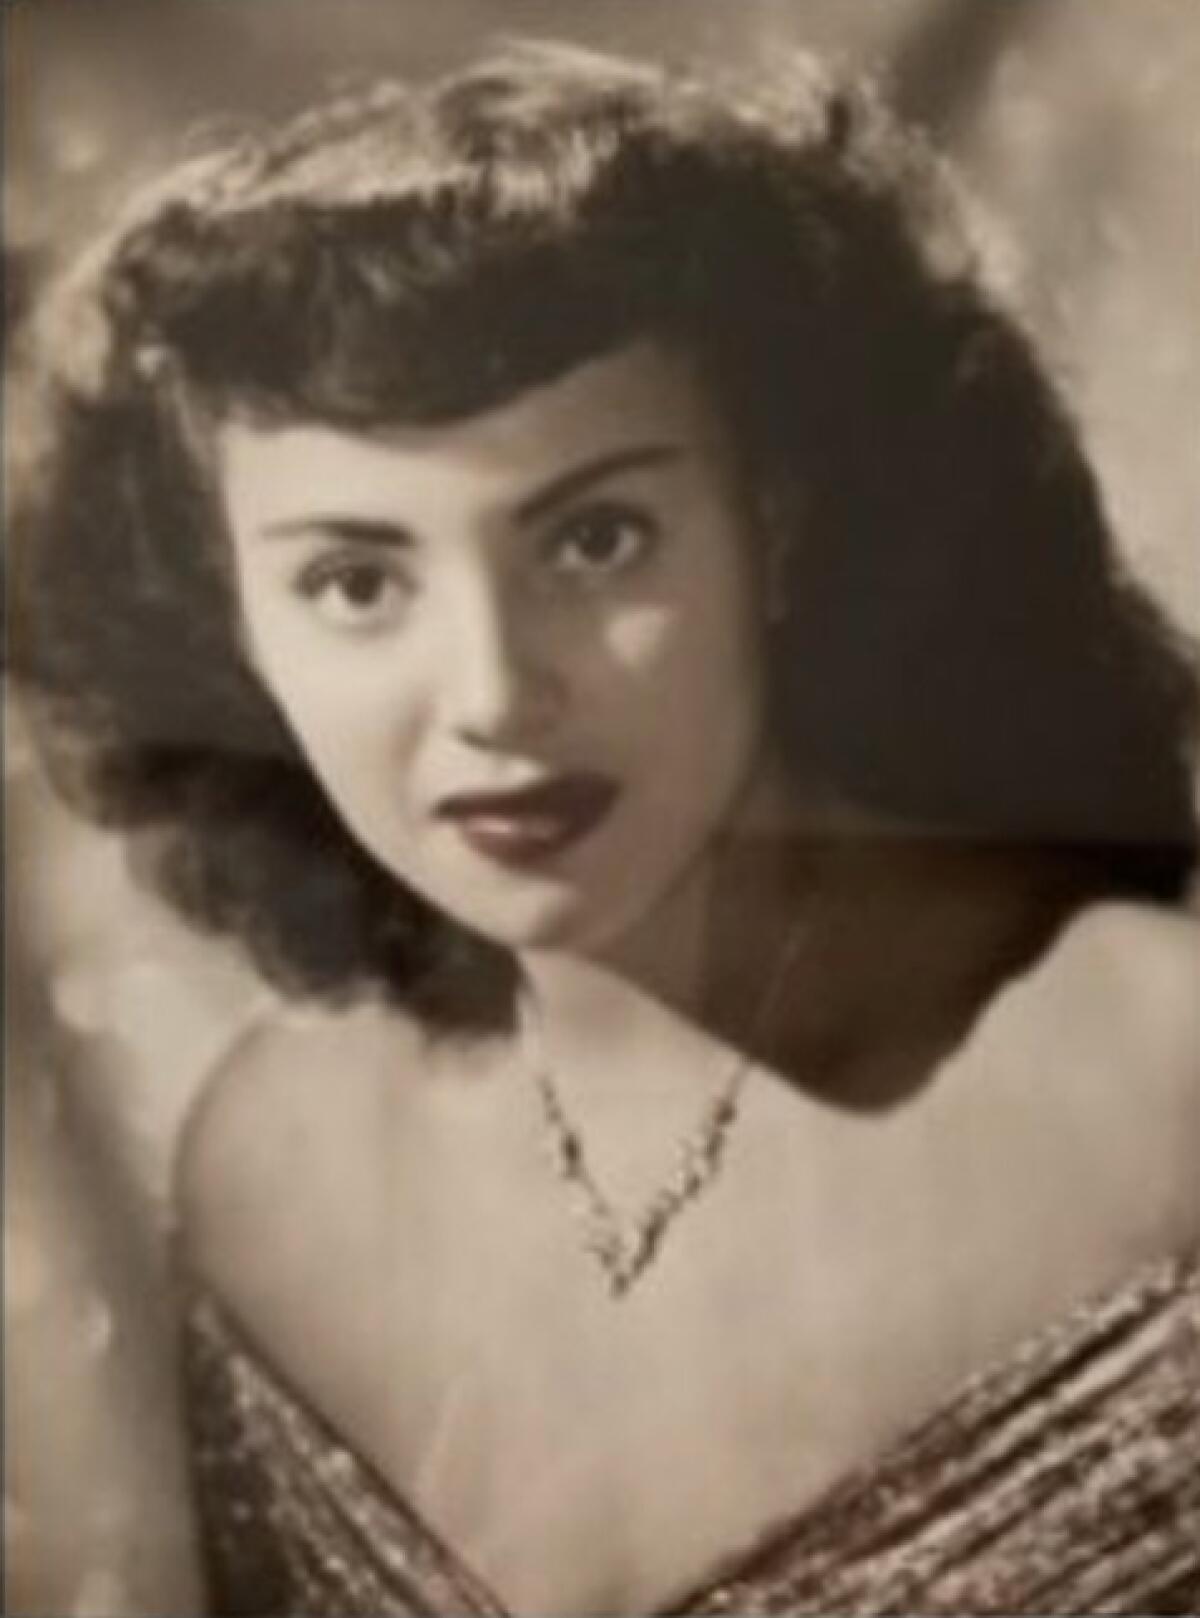 DNA analysis has helped identify Lillian Marie Cardenas, who was born in 1928 and